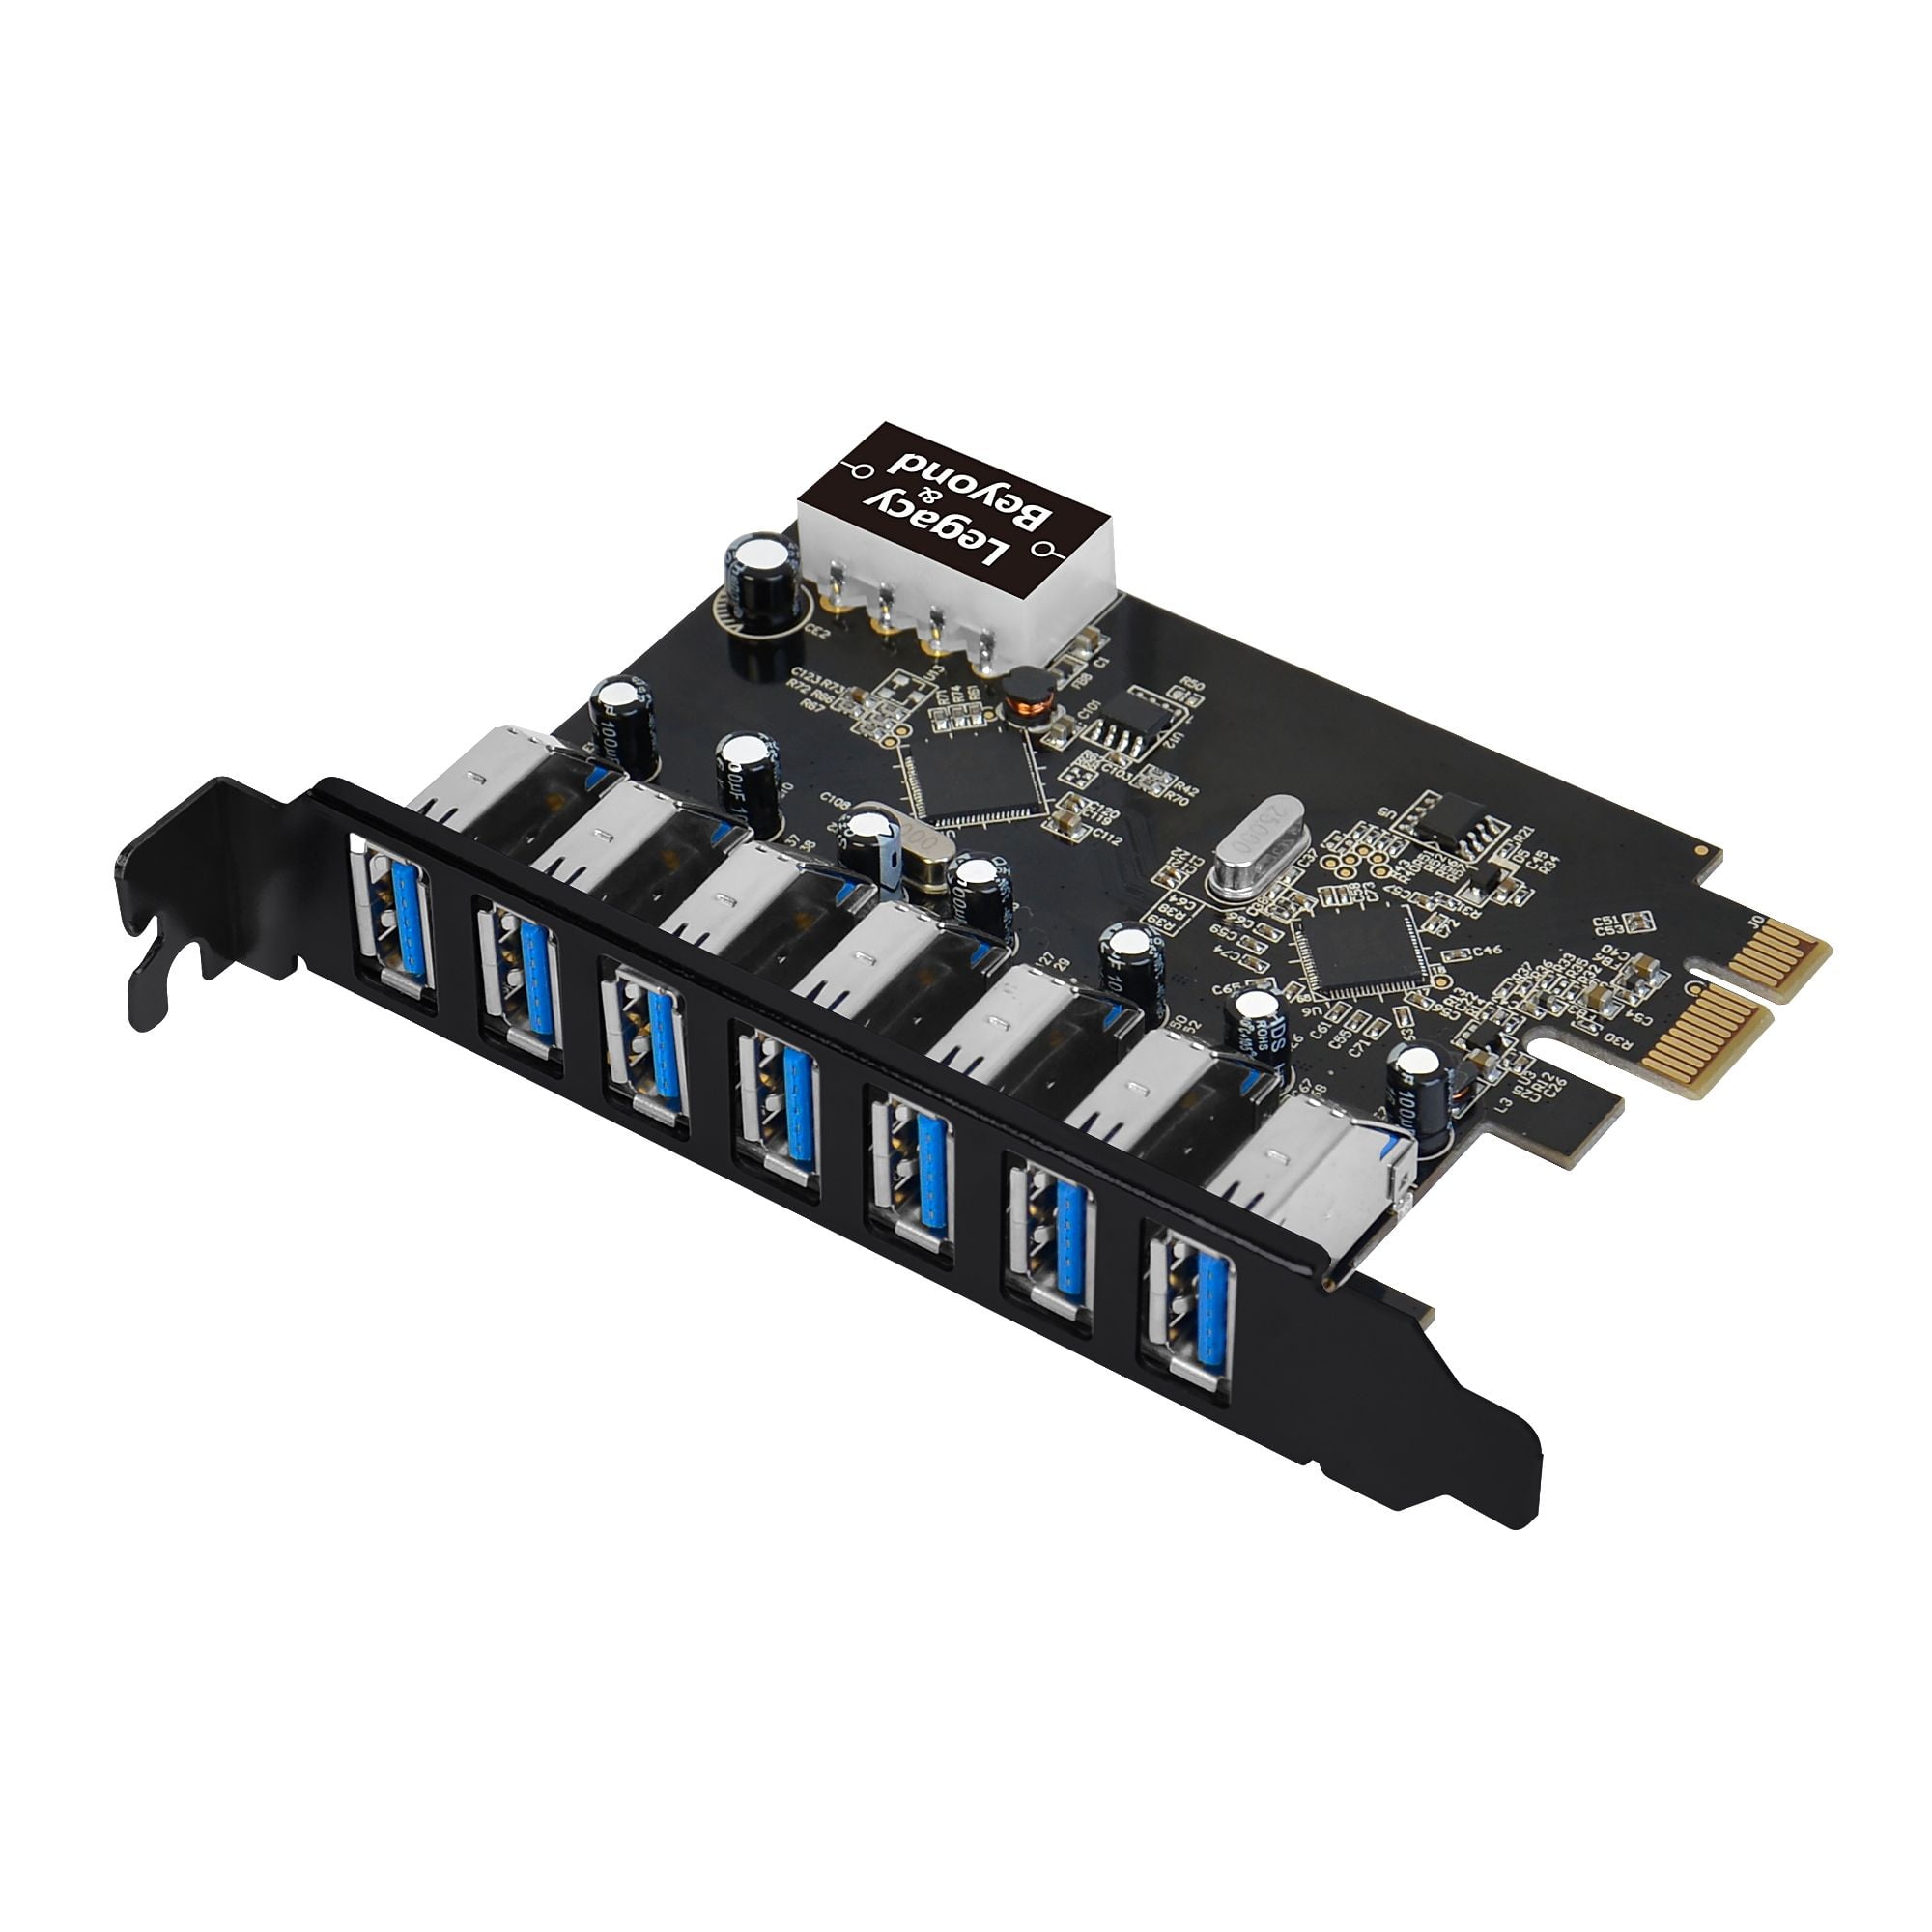 SIIG USB 3.0 7-Port Ext PCIe Host Adapter - image 1 of 7